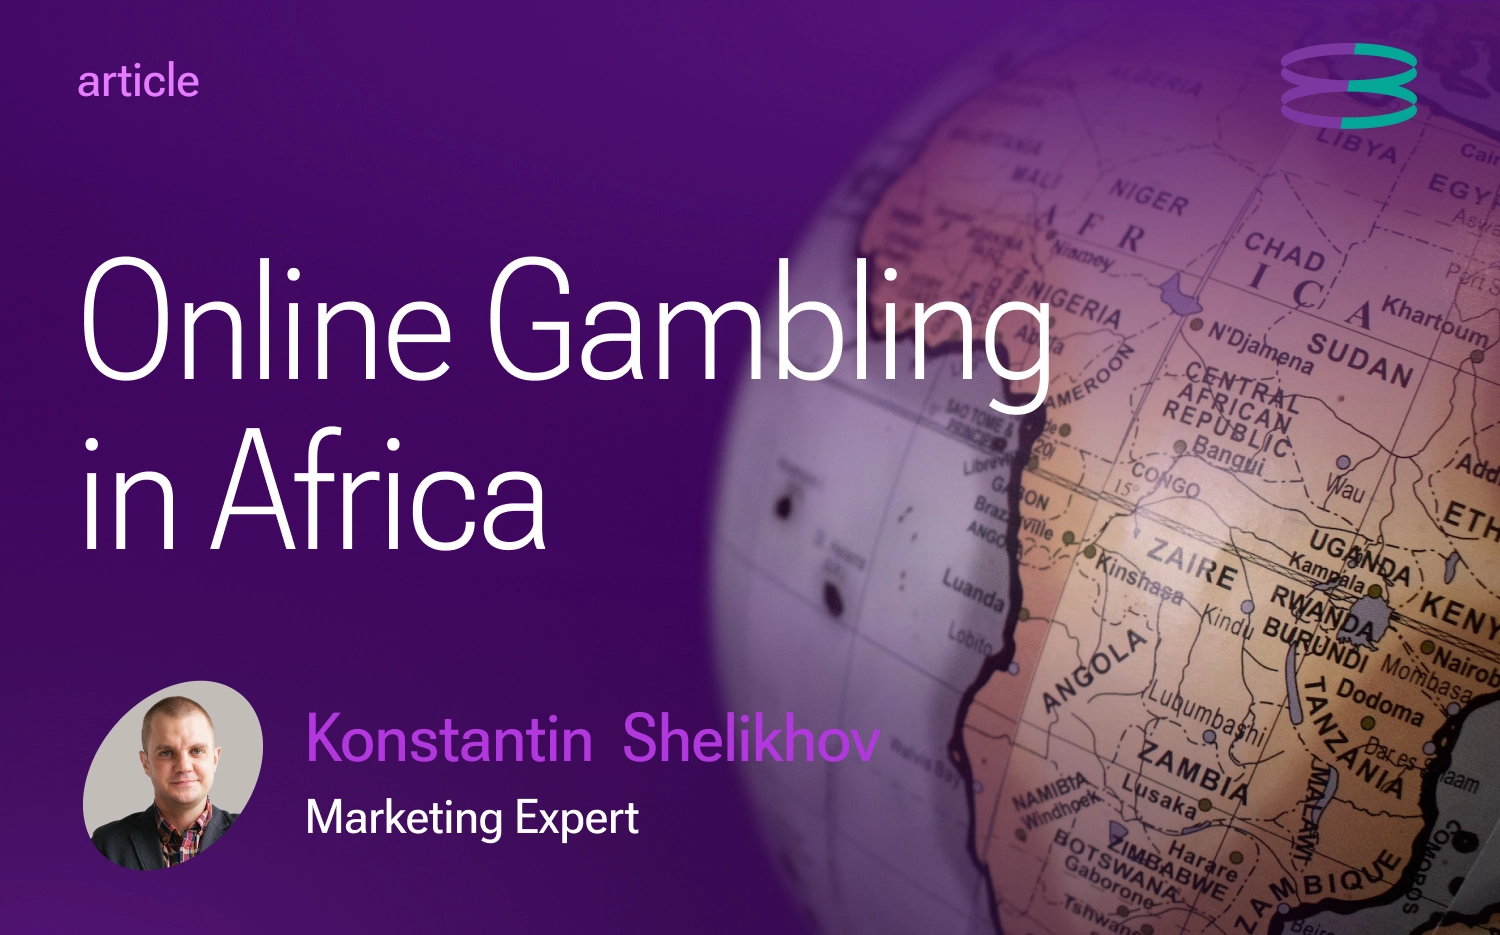 Online Gambling in Africa: Current Situation and Future